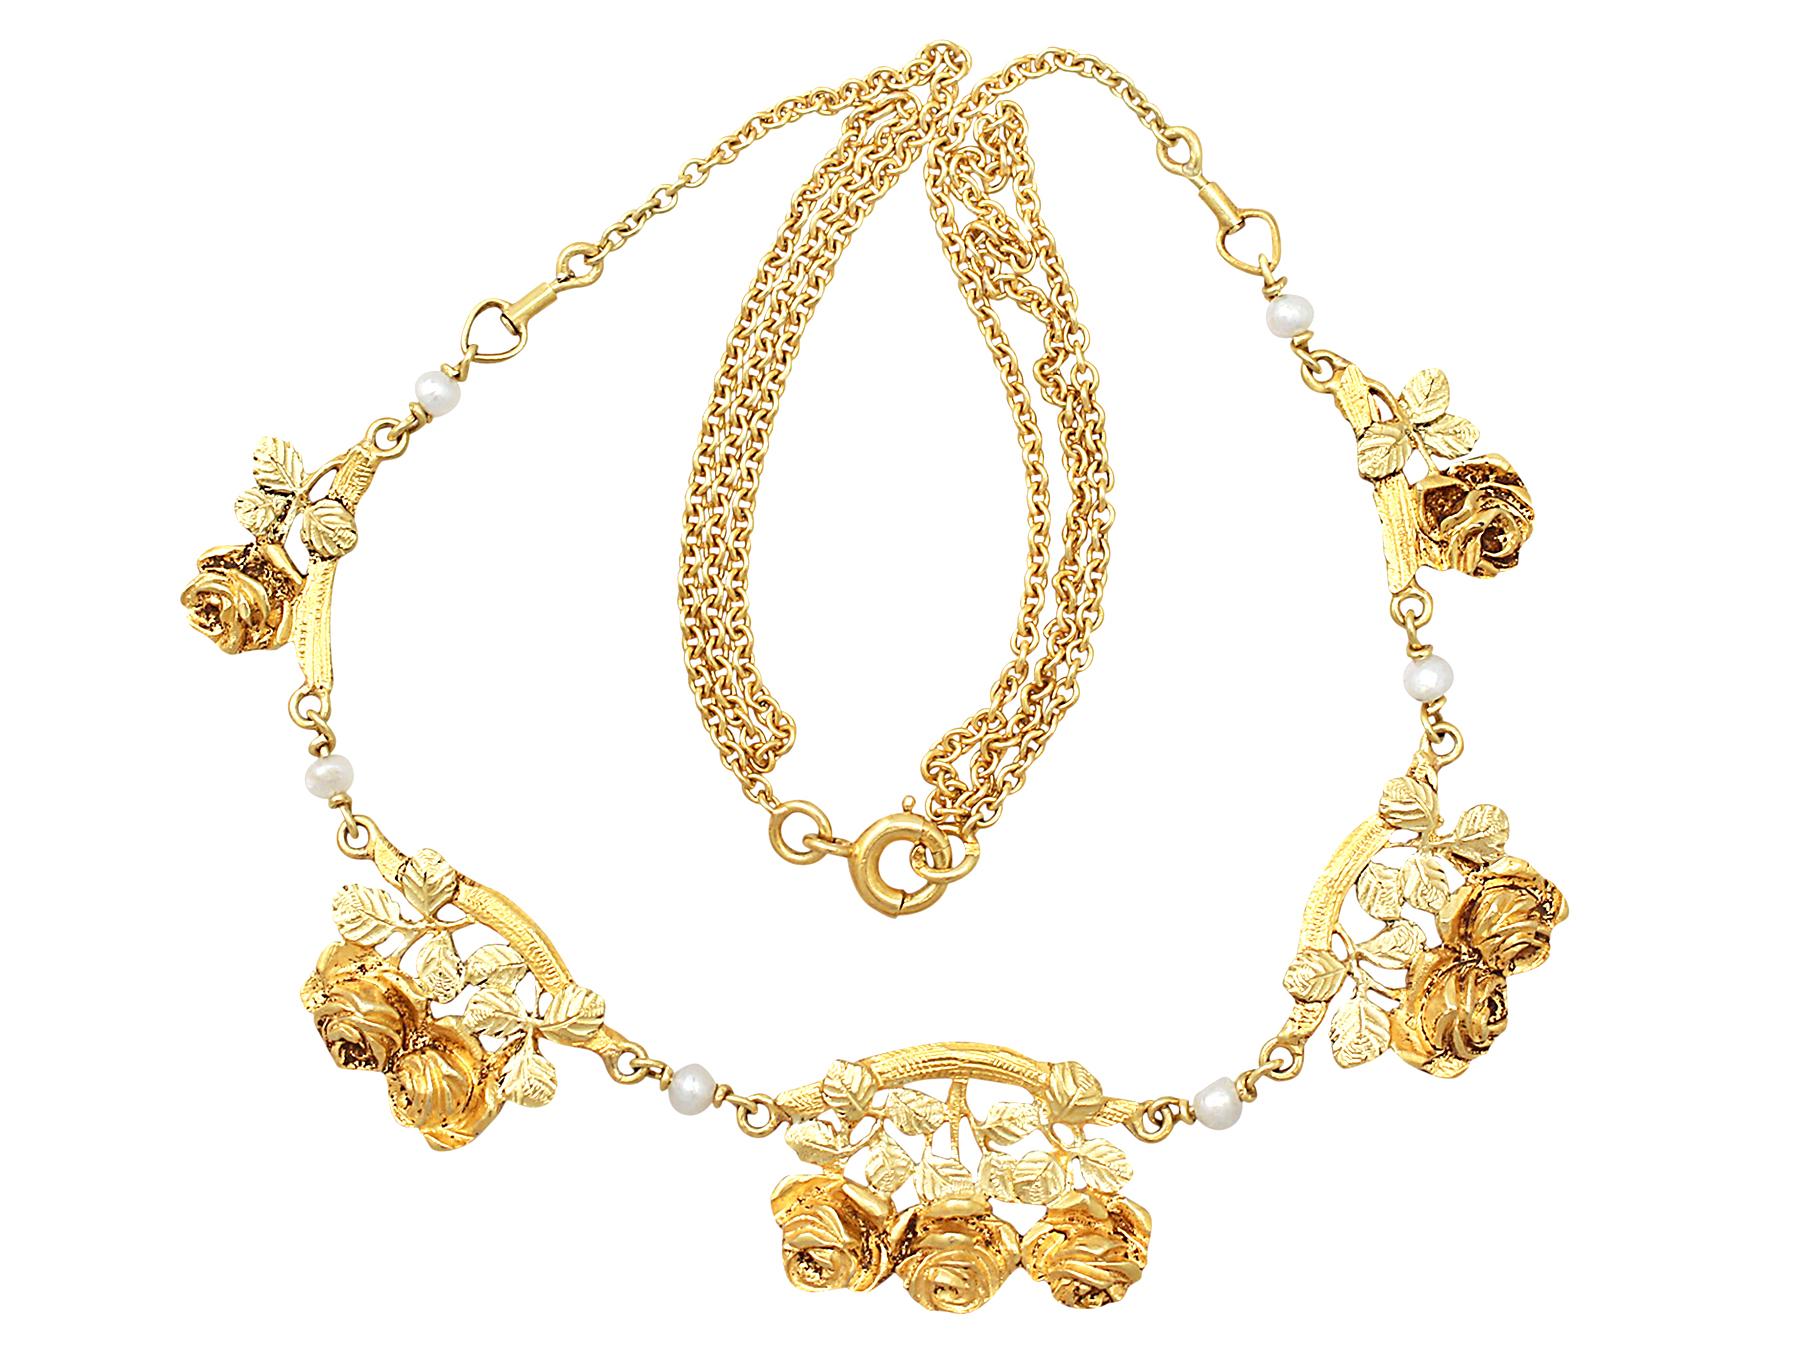 A fine and impressive antique French Art Nouveau style pearl and 18 karat yellow gold necklace; an addition to our antique jewelry and estate jewelry collections.

This fine antique gold and pearl necklace has been crafted in two toned 18k yellow